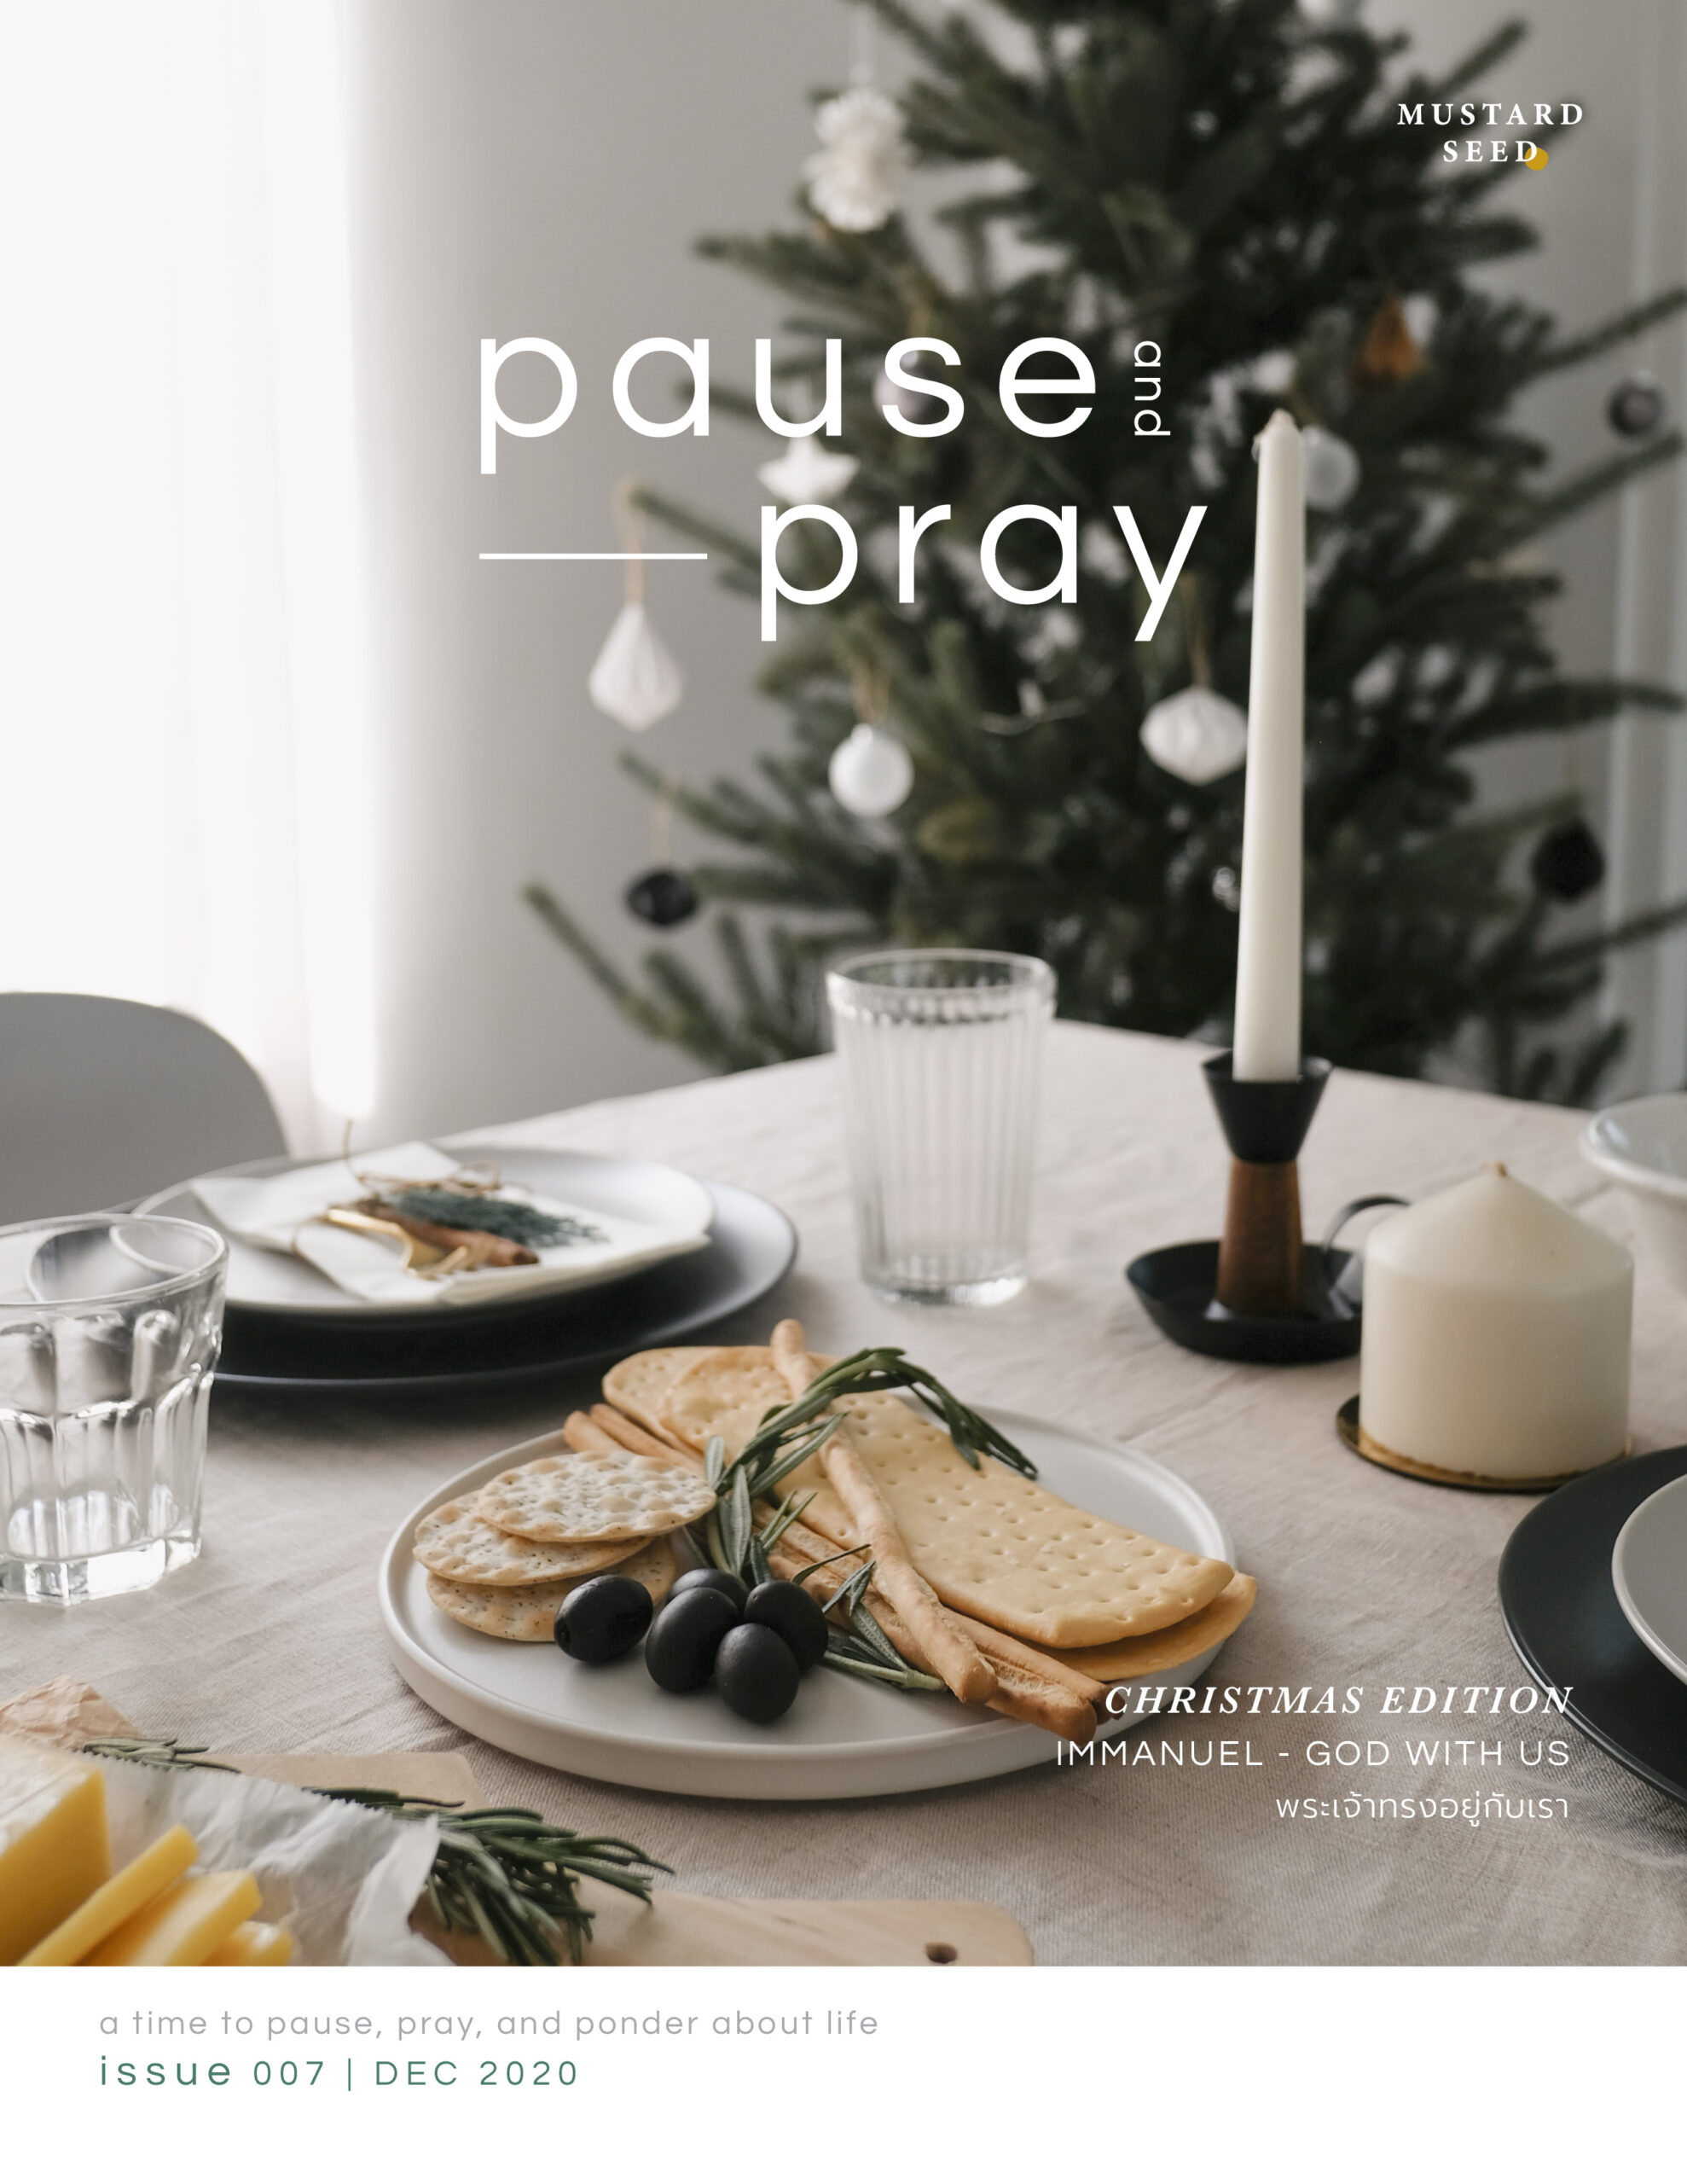 PAUSE & PRAY | ISSUE 07 “IMMANUEL GOD WITH US”